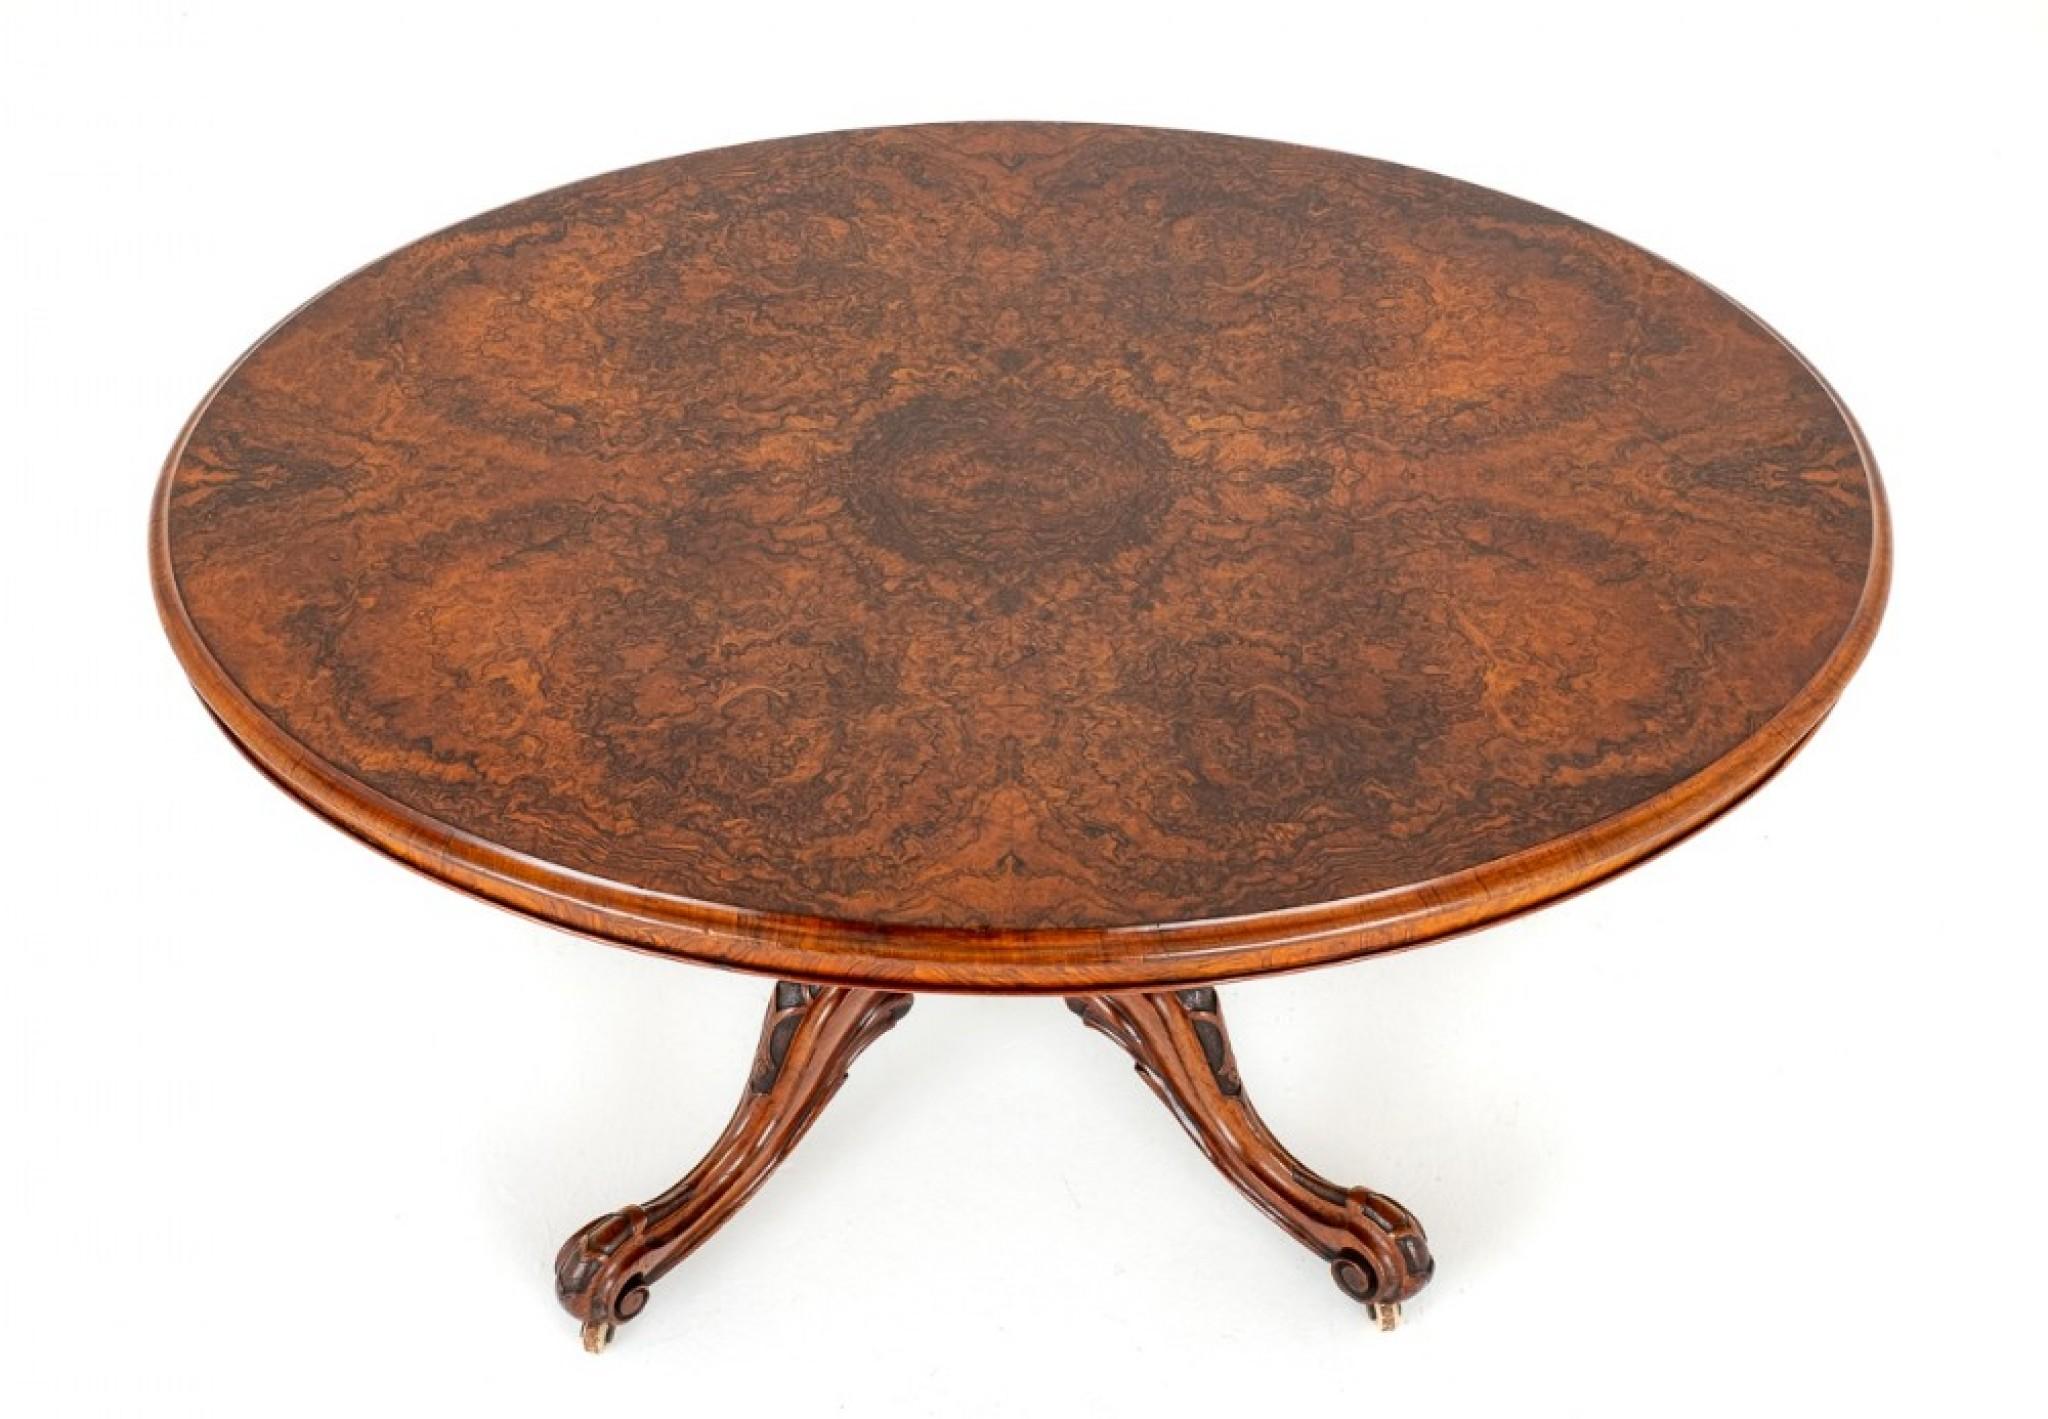 Victorian Burr Walnut Oval Centre Table.
The Top of the Table Having the Most Wonderful Burr Walnut Veneers Complete with Thumb Moldings.
The Base of the Table Featuring a Turned and Carved Column, Swept and Carved Legs Terminating with Brass